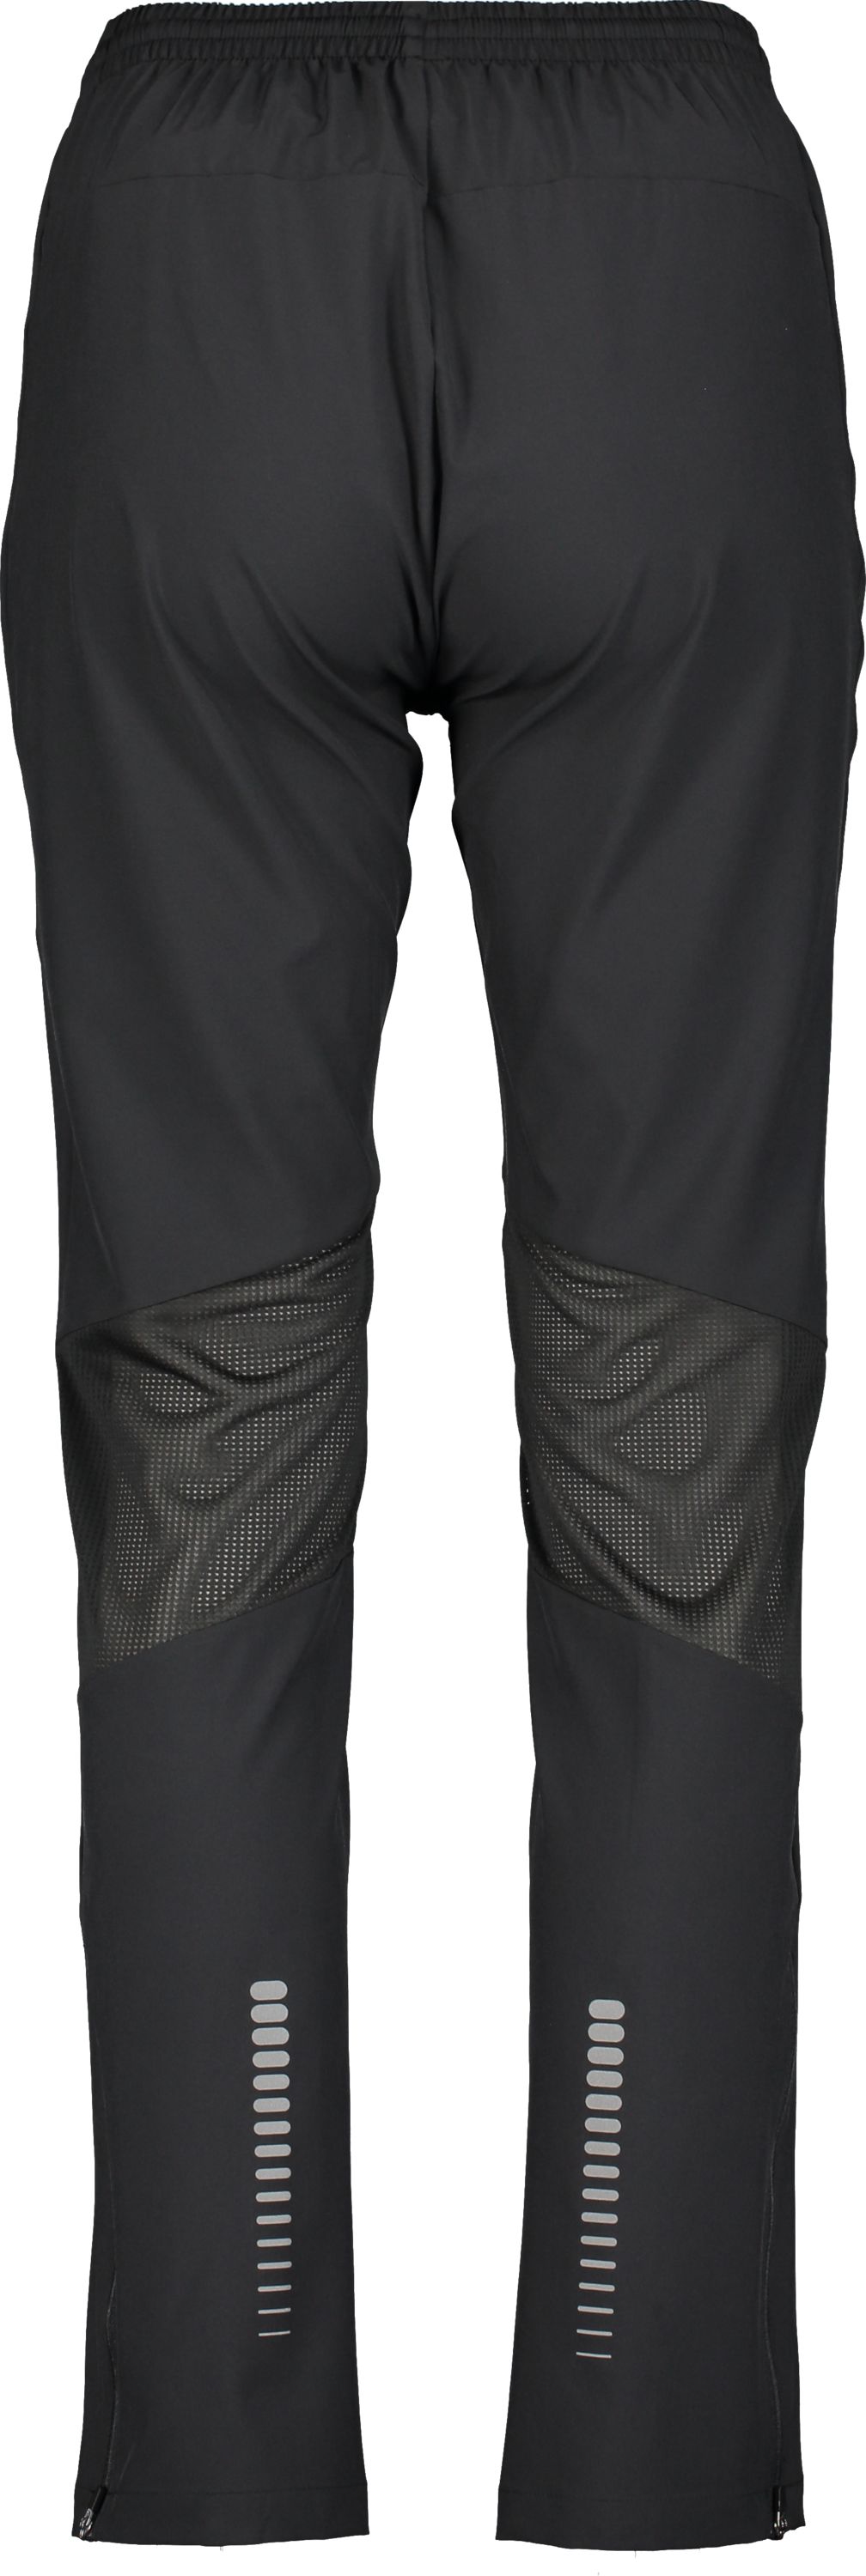 RONHILL, WIND PANT W